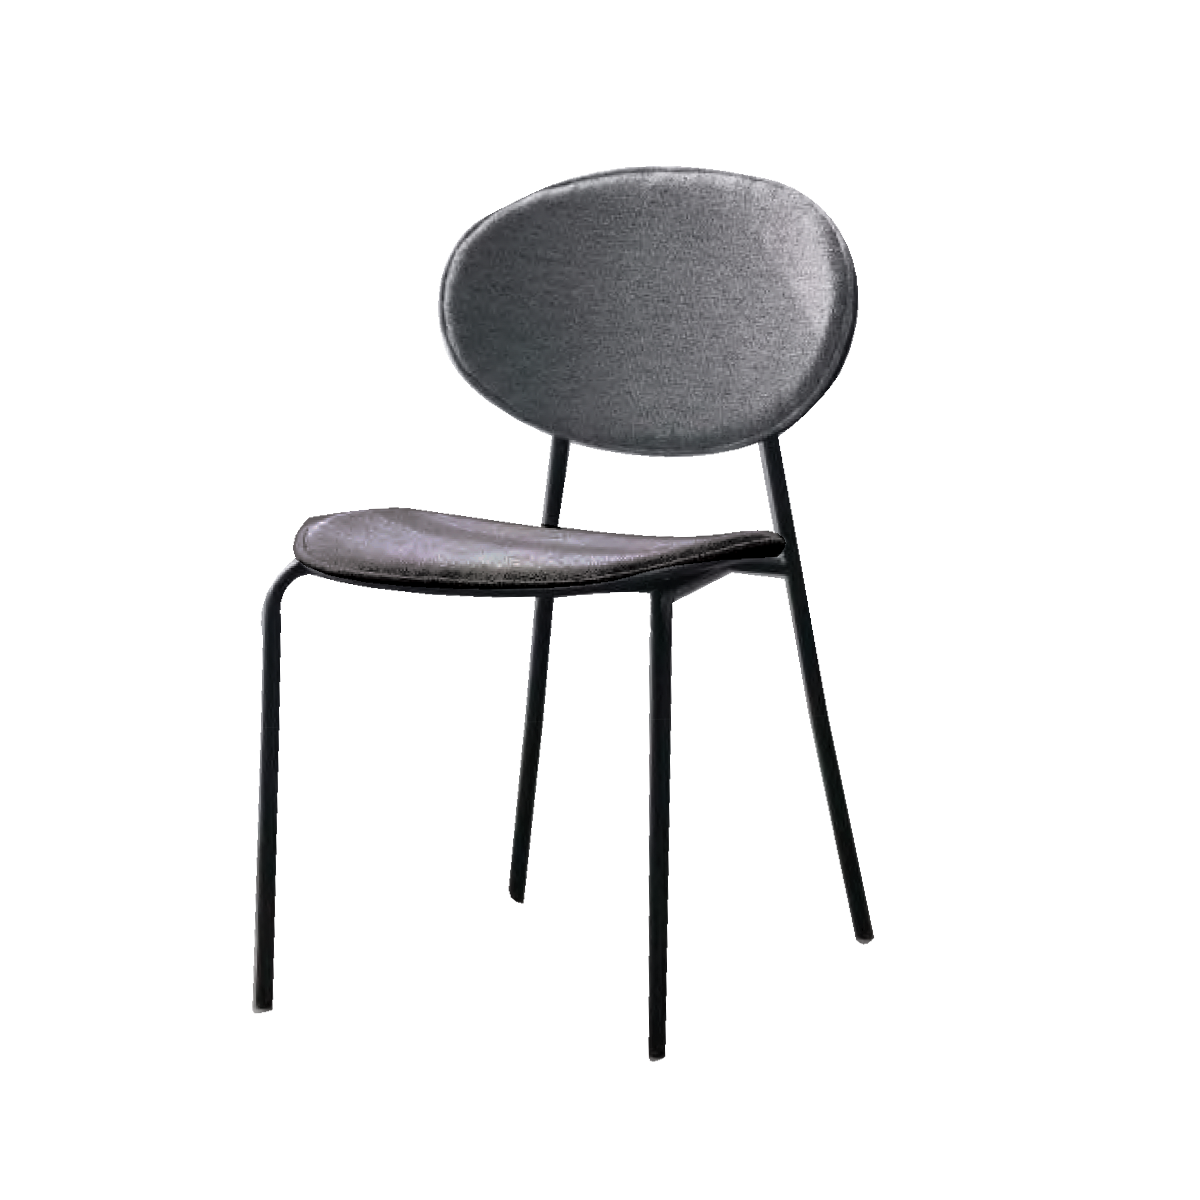 MABLO barstool | Exclusive Hotel & Hospitality Furniture